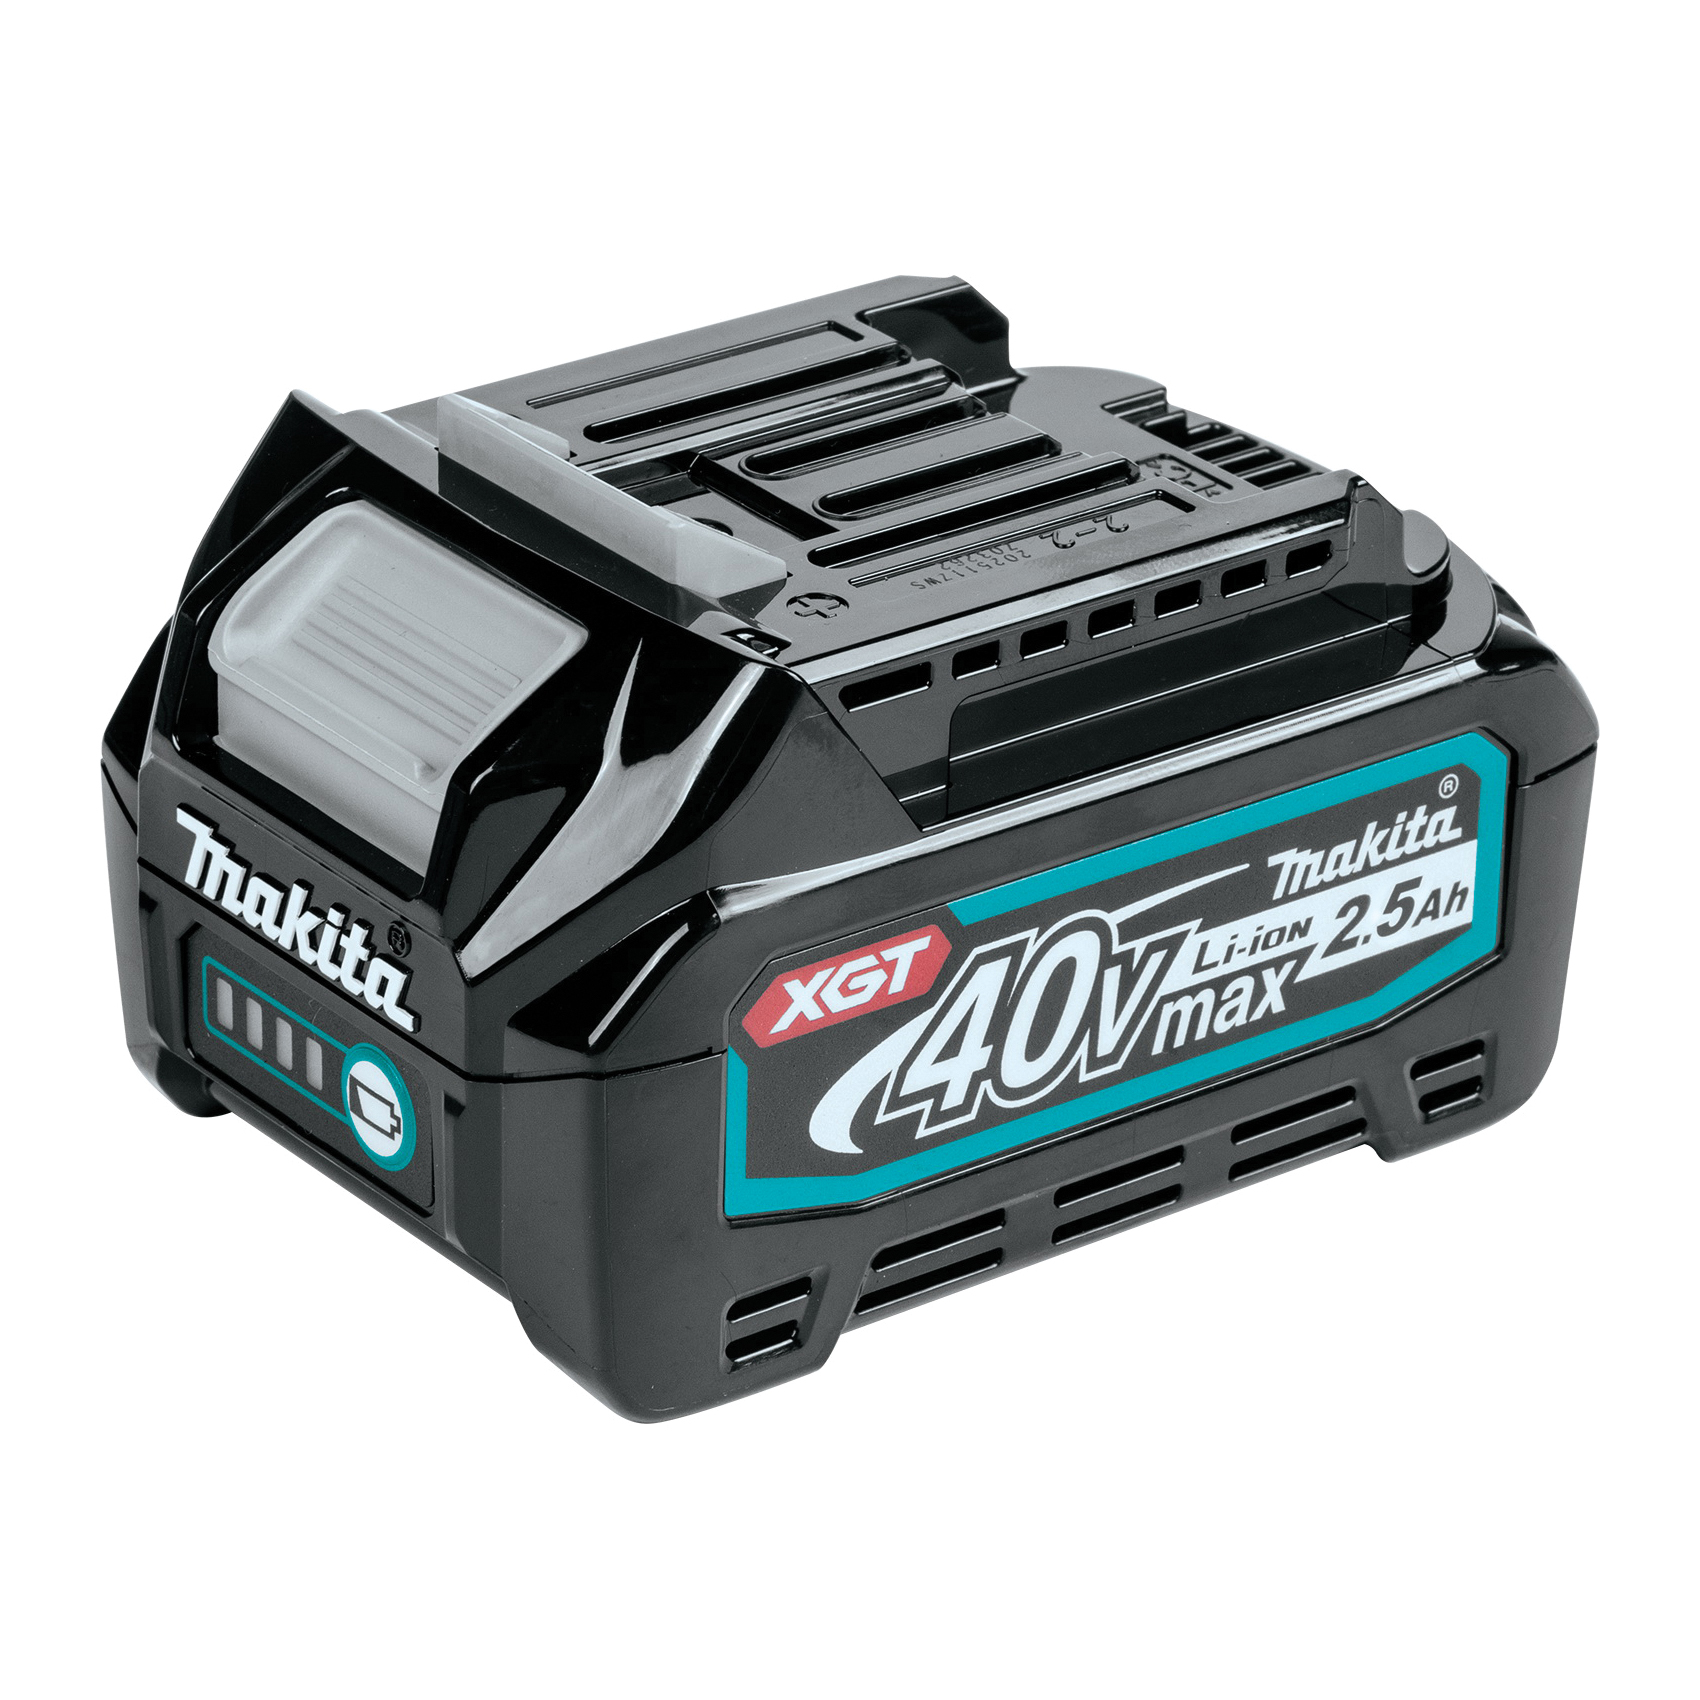 Makita XGT GDT01D Impact Driver Kit, Battery Included, 40 V, 2.5 Ah, 1/4 in Drive, Hex Drive - 2